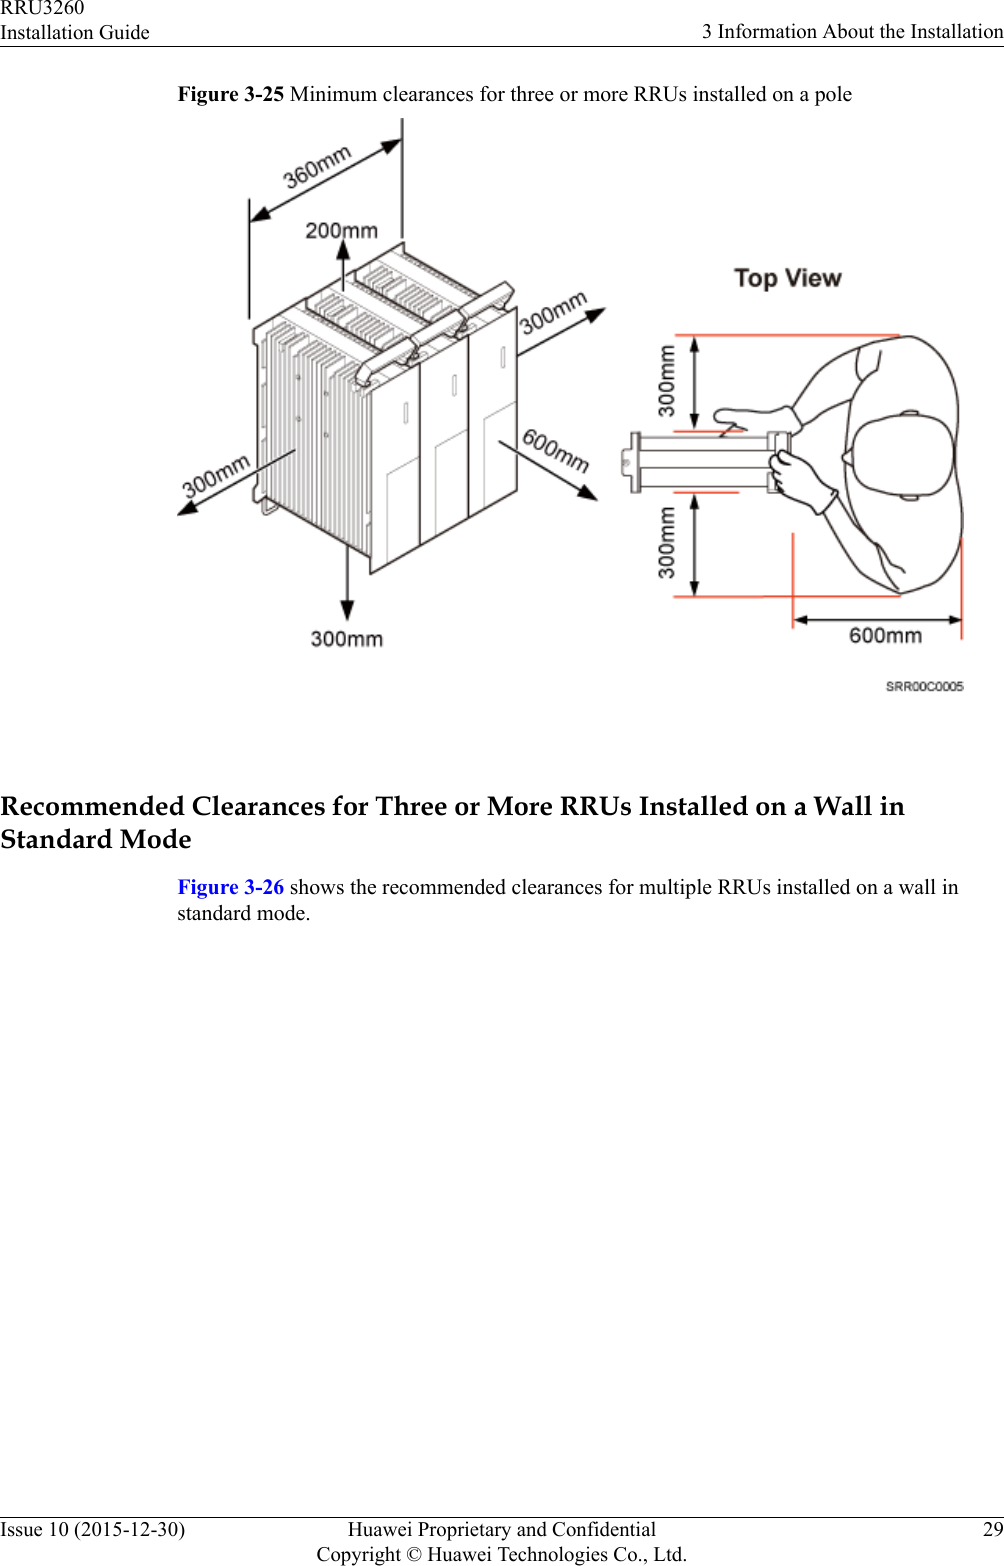 Figure 3-25 Minimum clearances for three or more RRUs installed on a pole Recommended Clearances for Three or More RRUs Installed on a Wall inStandard ModeFigure 3-26 shows the recommended clearances for multiple RRUs installed on a wall instandard mode.RRU3260Installation Guide 3 Information About the InstallationIssue 10 (2015-12-30) Huawei Proprietary and ConfidentialCopyright © Huawei Technologies Co., Ltd.29